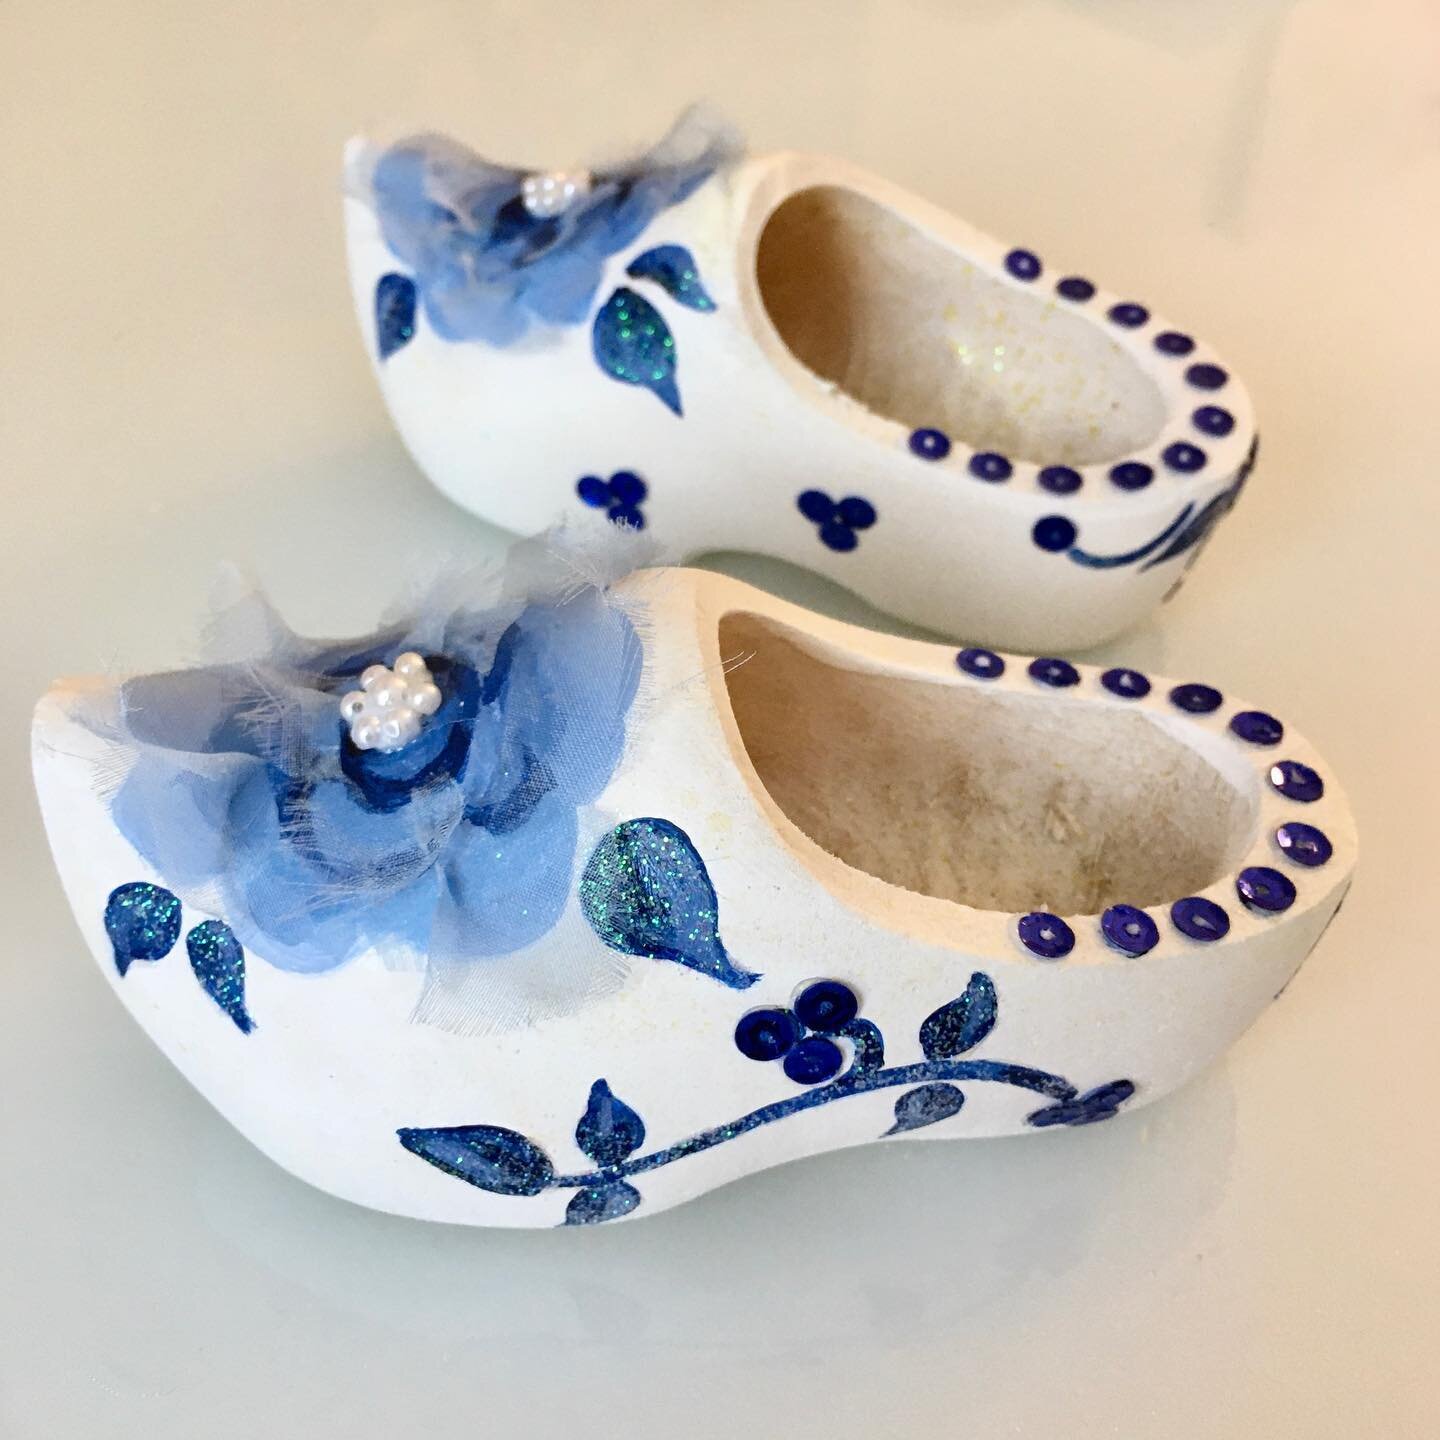 I got a special commission to design these adorable little Dutch clogs!  The client wanted me to add my personal style to the traditional clogs while using the Delft blue color.  And of course, it had to have embellishments and lots of sparkles ✨ 
.
